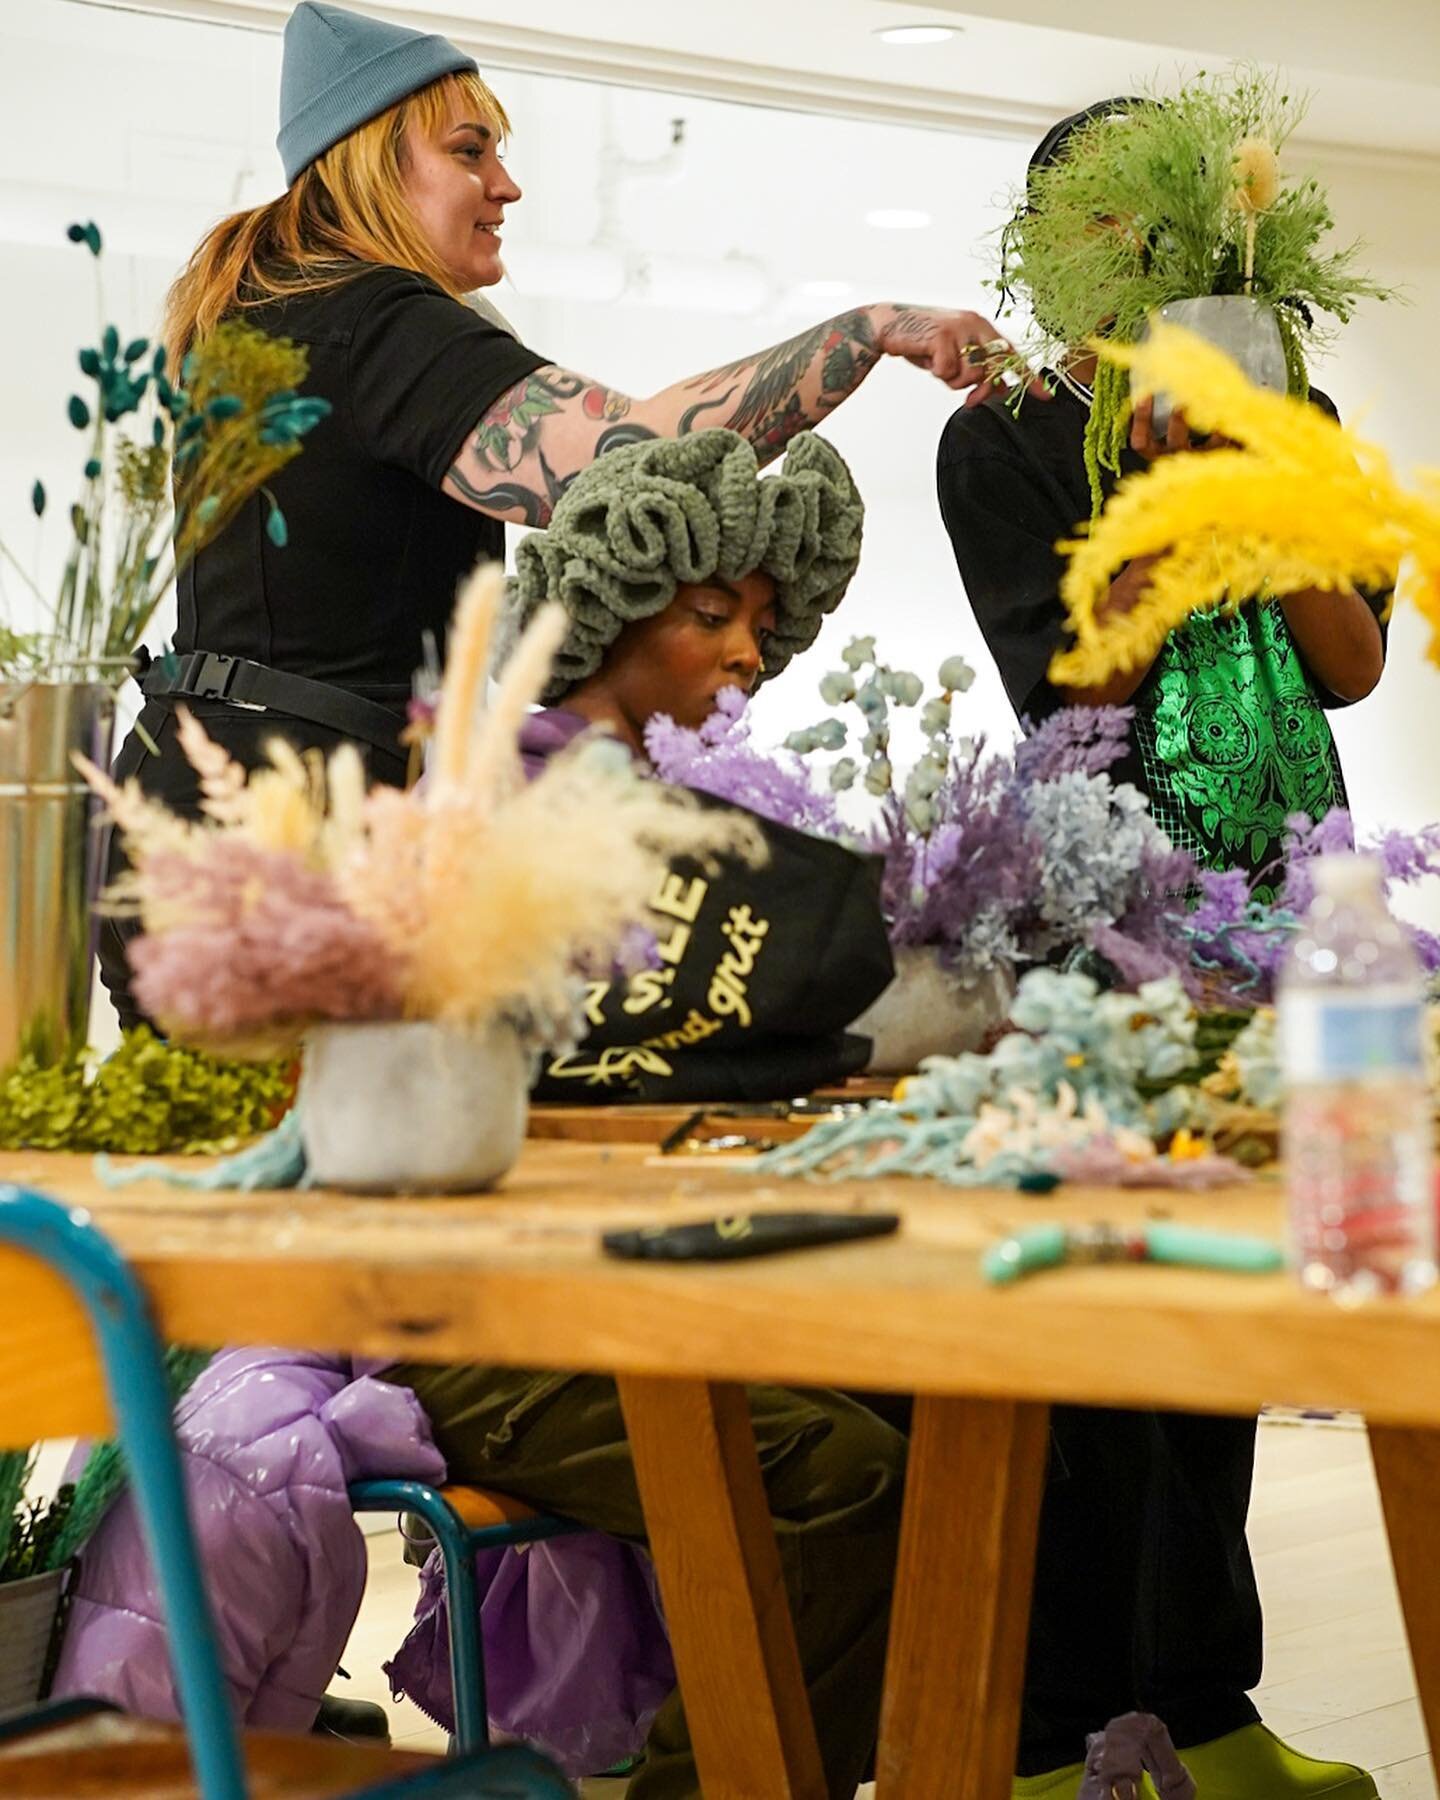 Last month I had the honor of teaching a dried floral class for International Women&rsquo;s Day @herschelnewyork This was so fun with such a great group! And I&rsquo;m happy to say I was able to donate a portion of my fee to @blackfloristfund !!! Tha